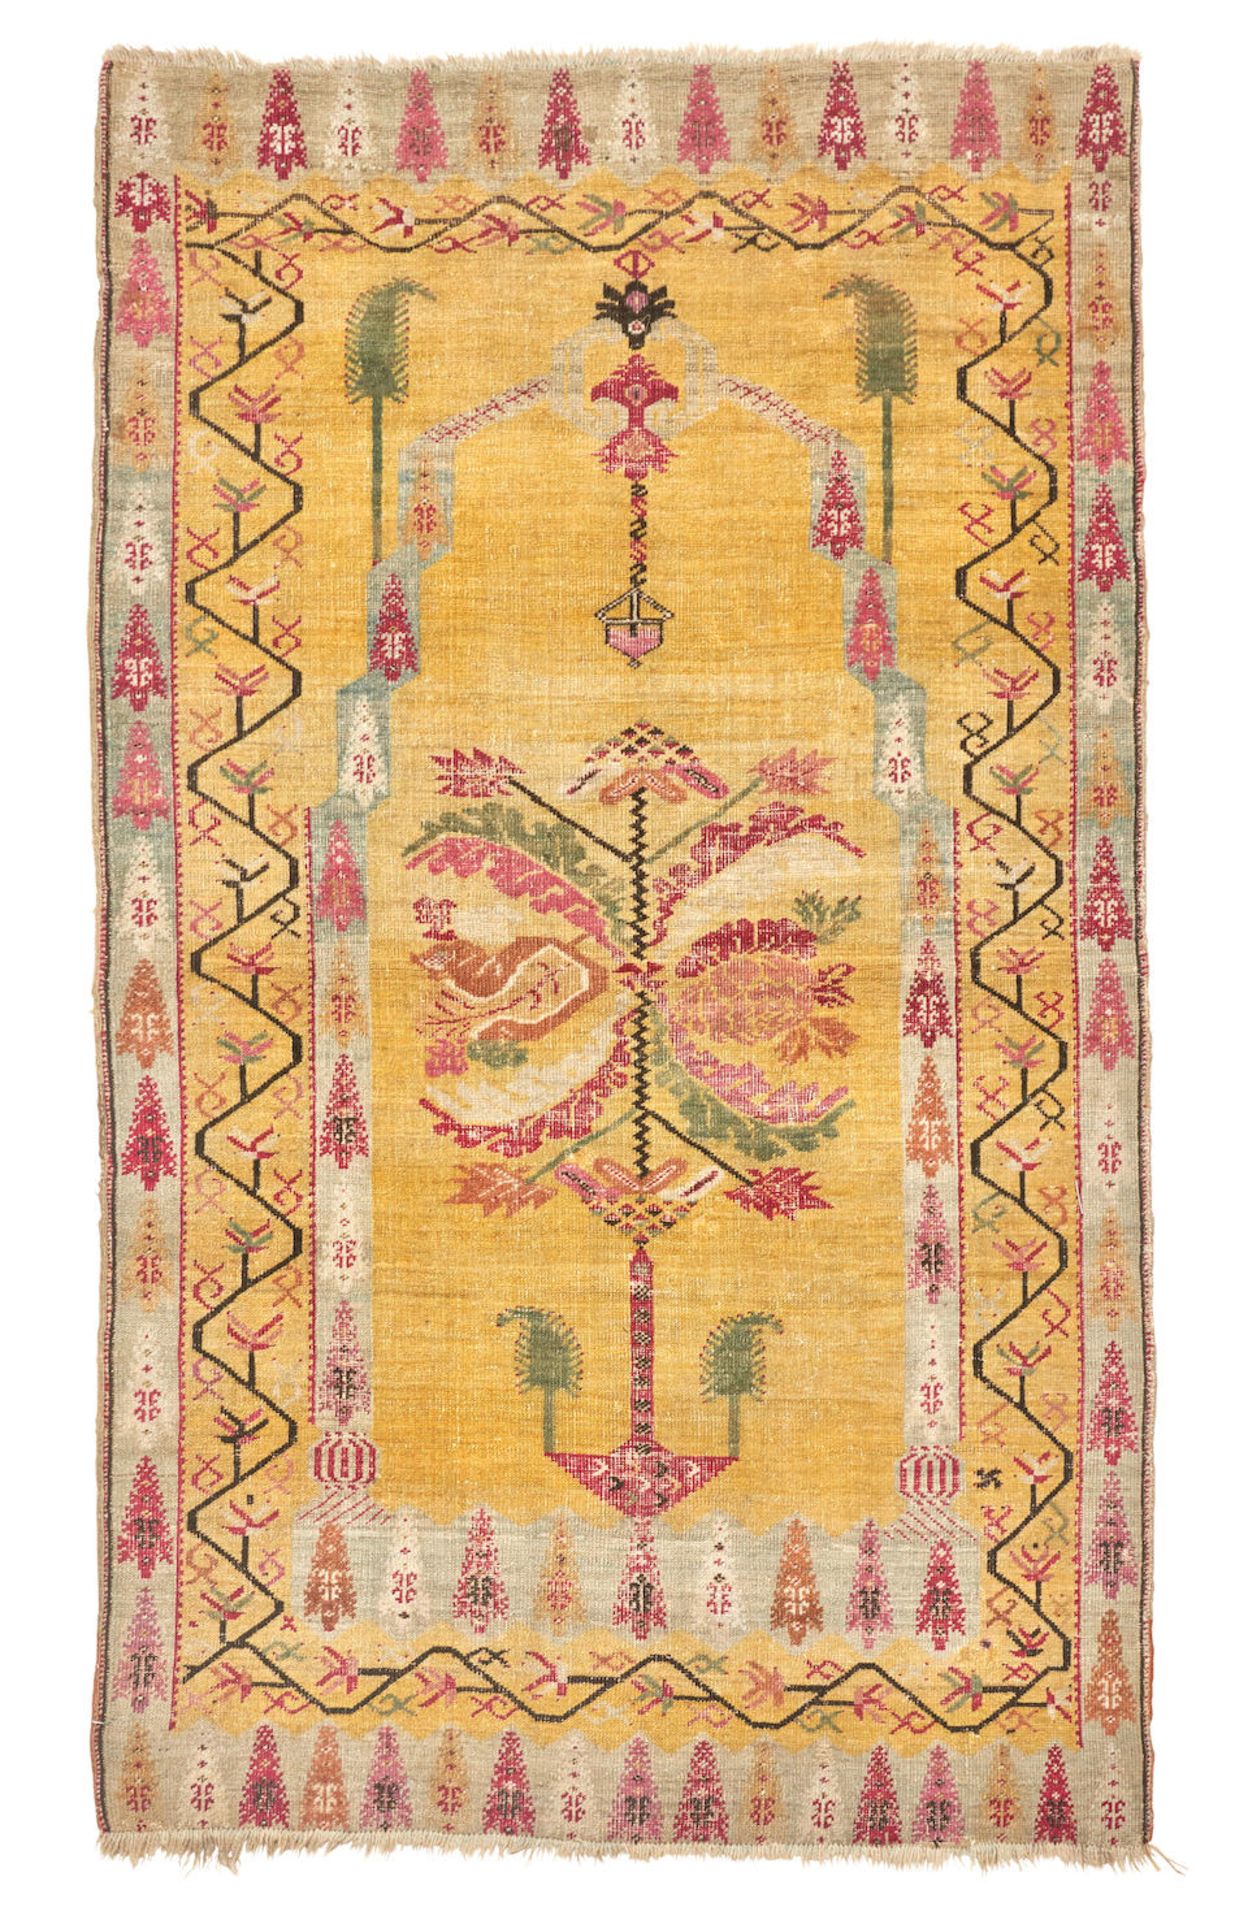 Ghiordes Prayer Rug Anatolia 3 ft. 10 in. x 6 ft. 1 in.